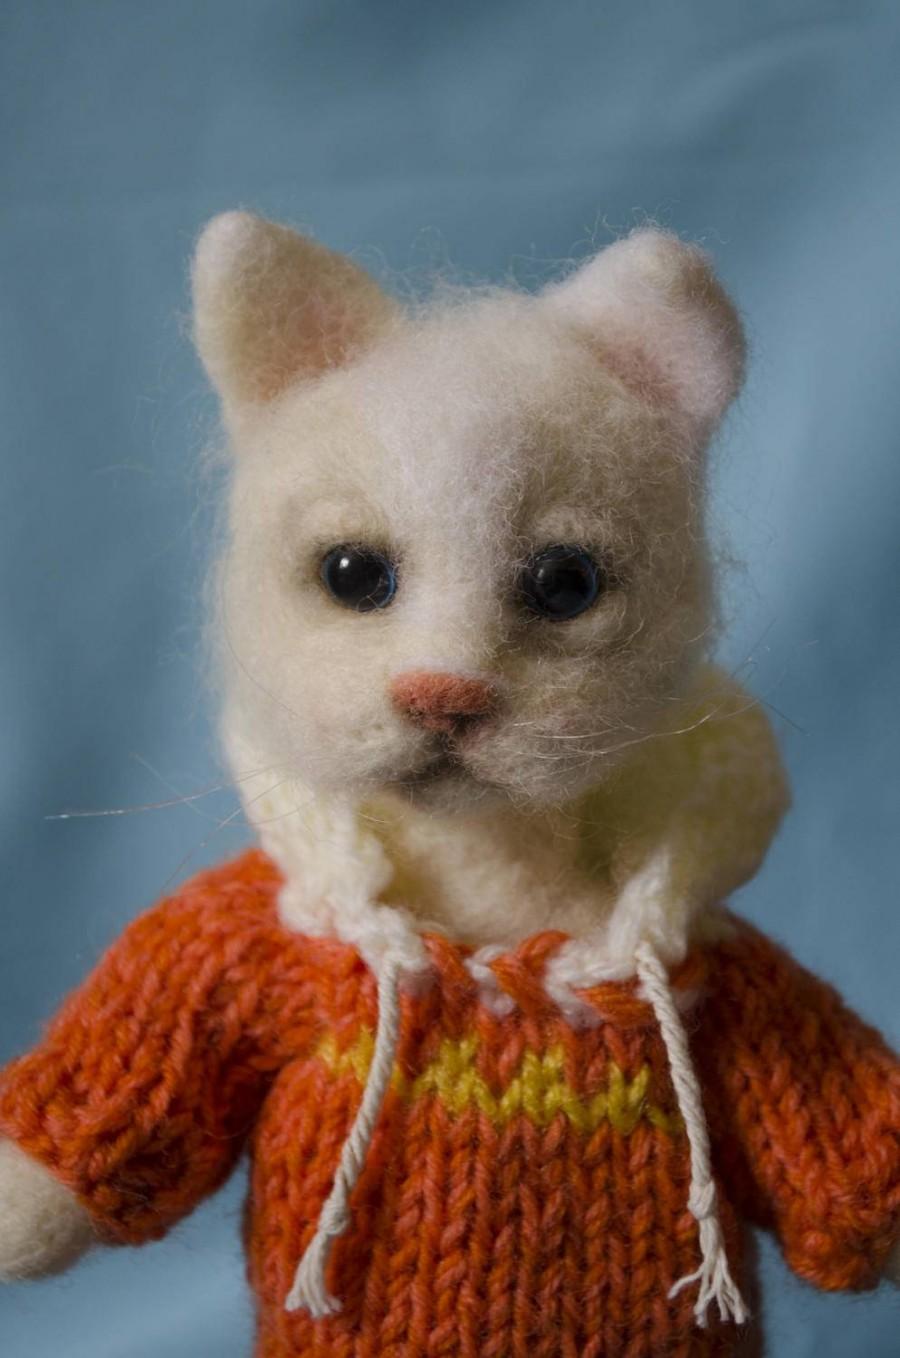 Wedding - Felted Cat, Felt cat toy, Wool cat, Cute cat, Neddle felted cat, Natural toy, Collectible toy, Soft wool toy, Cat sculpture, Kids toy Gift